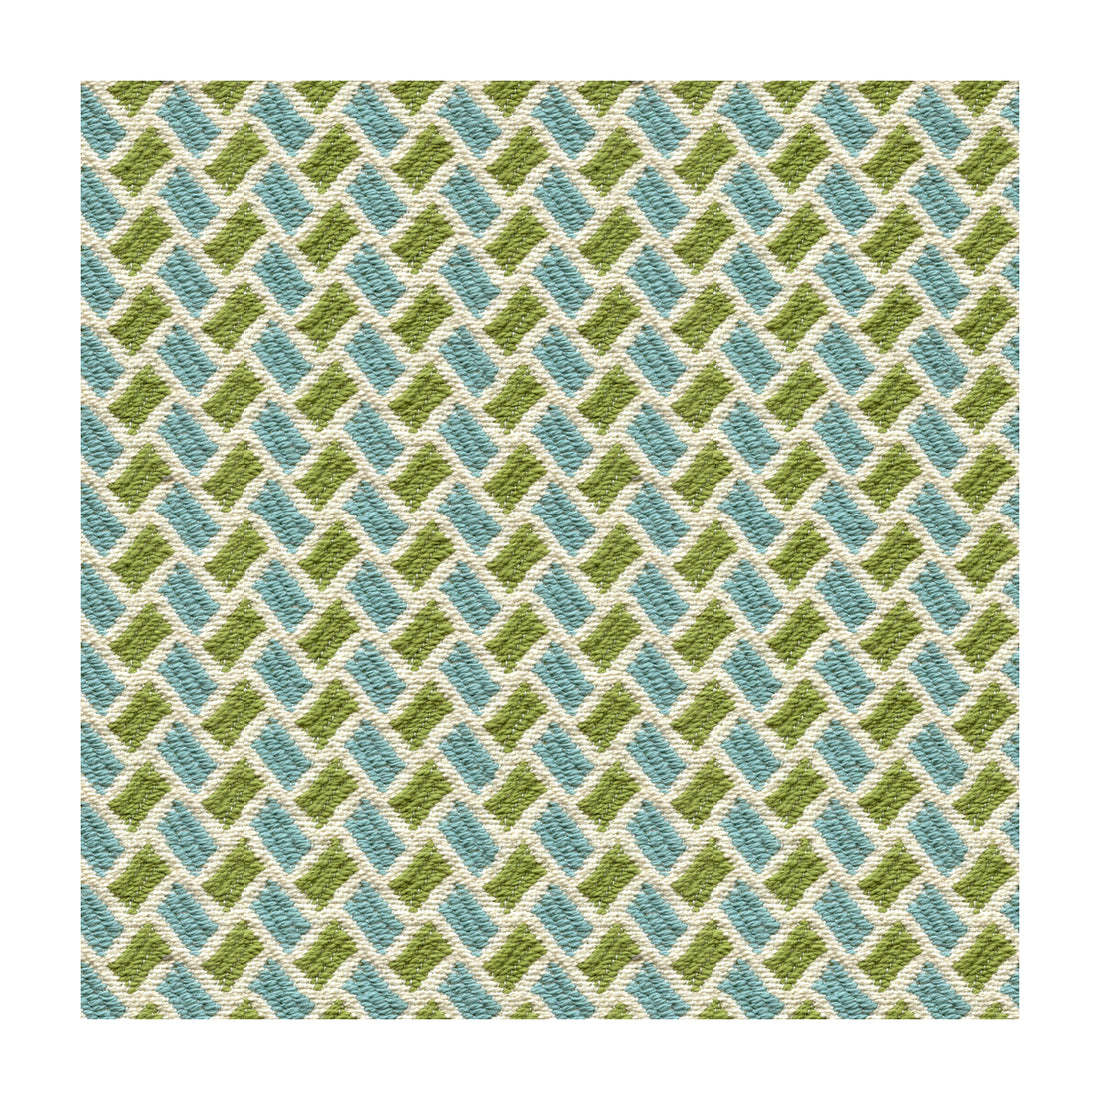 New Briquetage fabric in aqua/lime color - pattern 8015112.513.0 - by Brunschwig &amp; Fils in the Les Tropiques collection